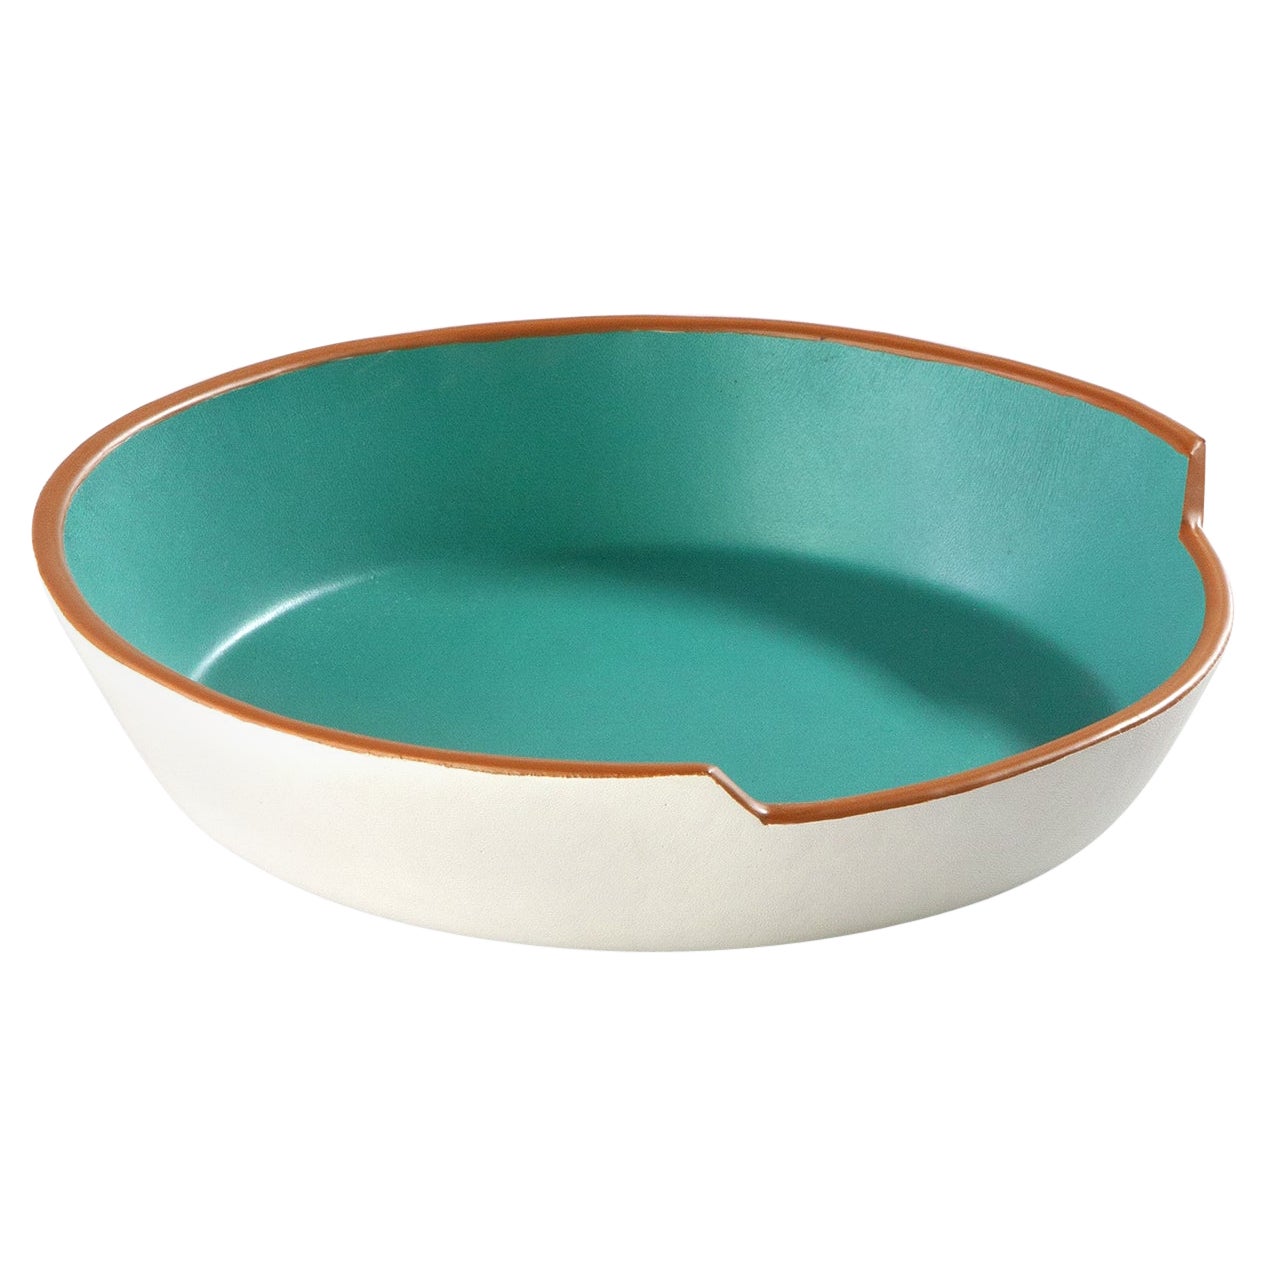 Handmade Luxury Leather Bowl in Teal and White For Sale